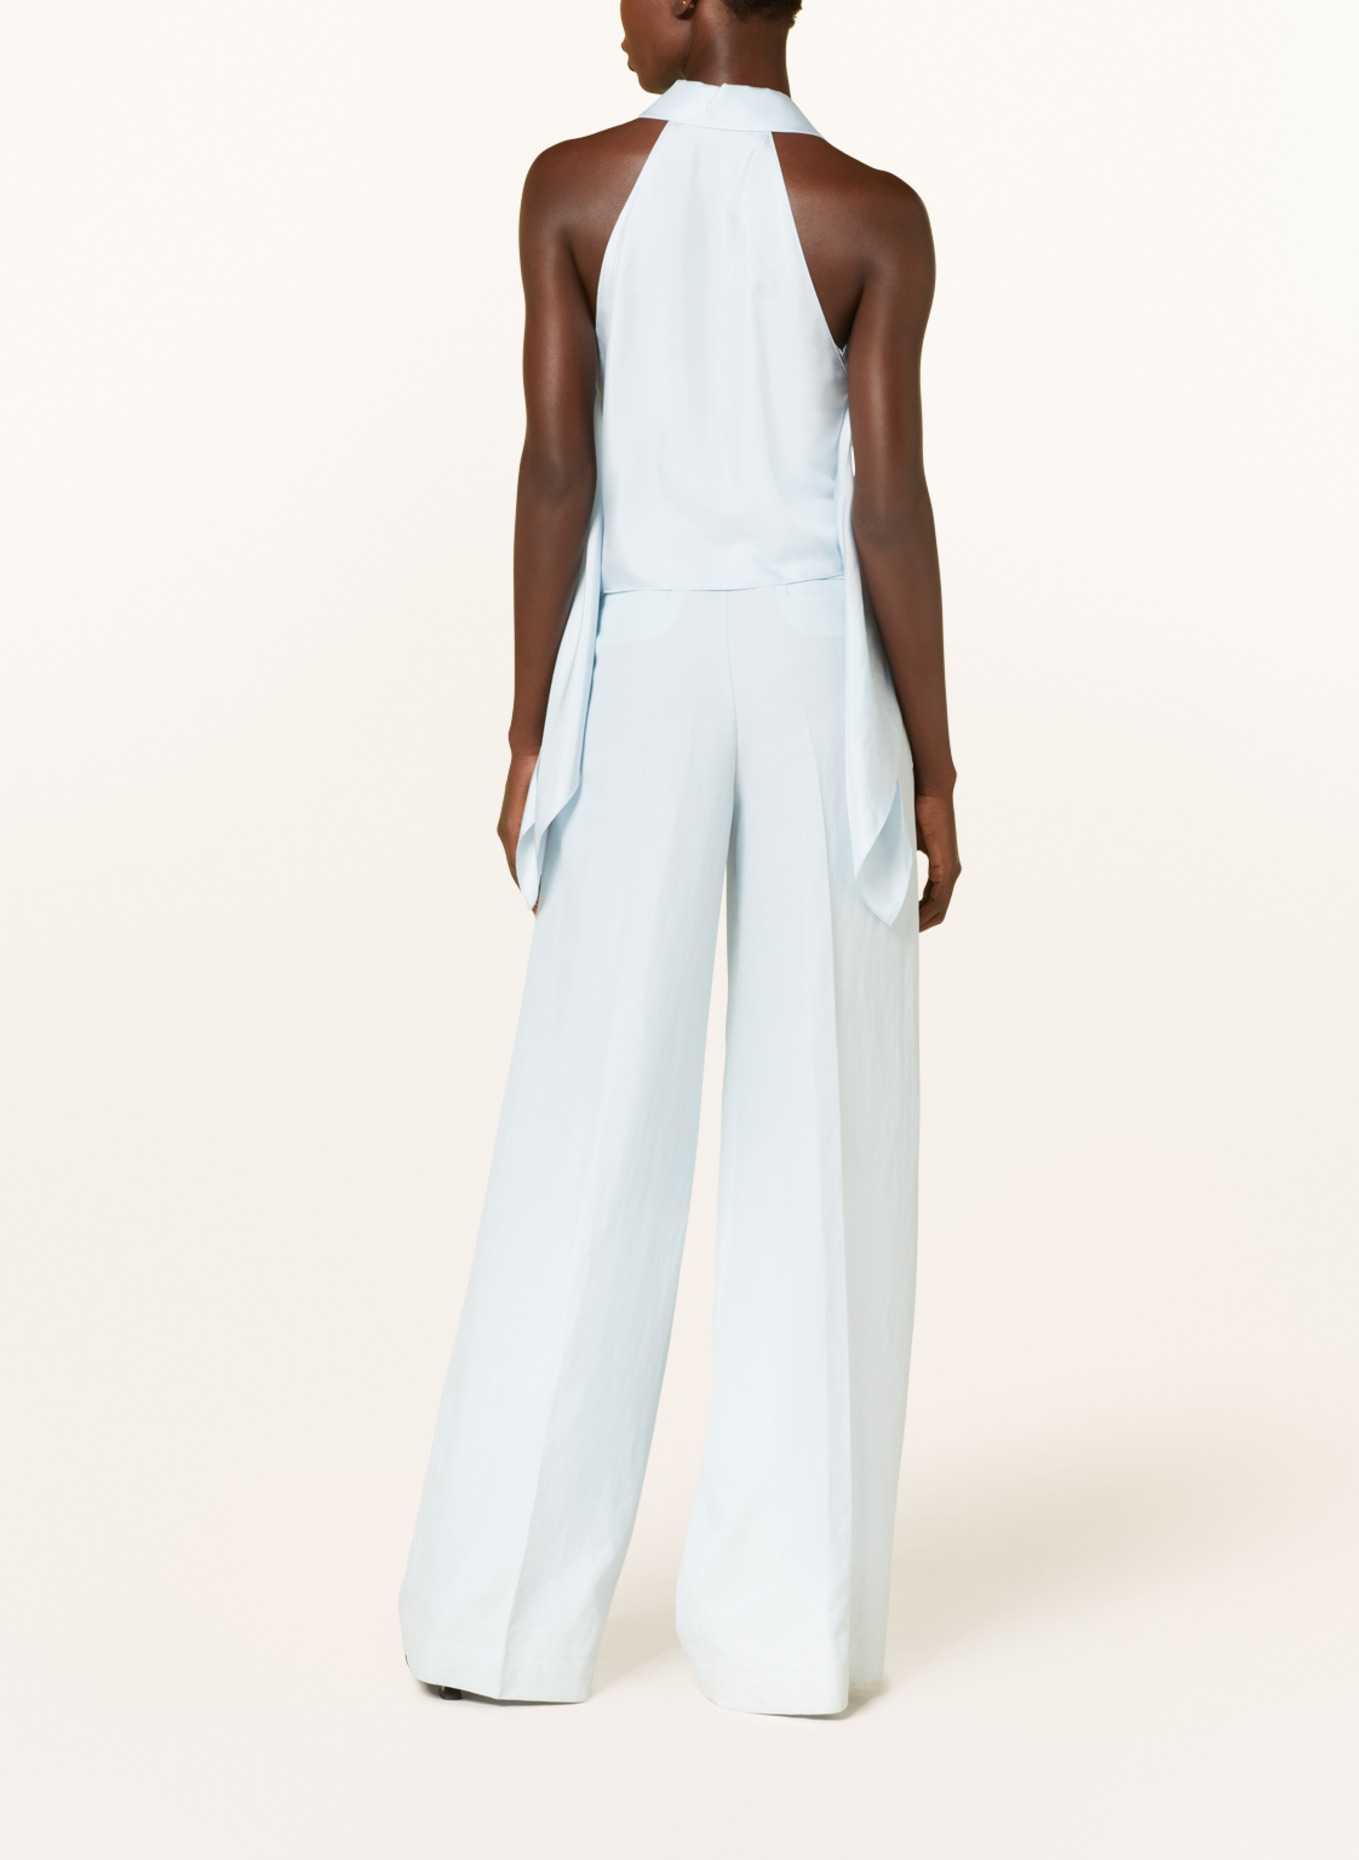 DOROTHEE SCHUMACHER Silk top with lace, Color: LIGHT BLUE (Image 3)